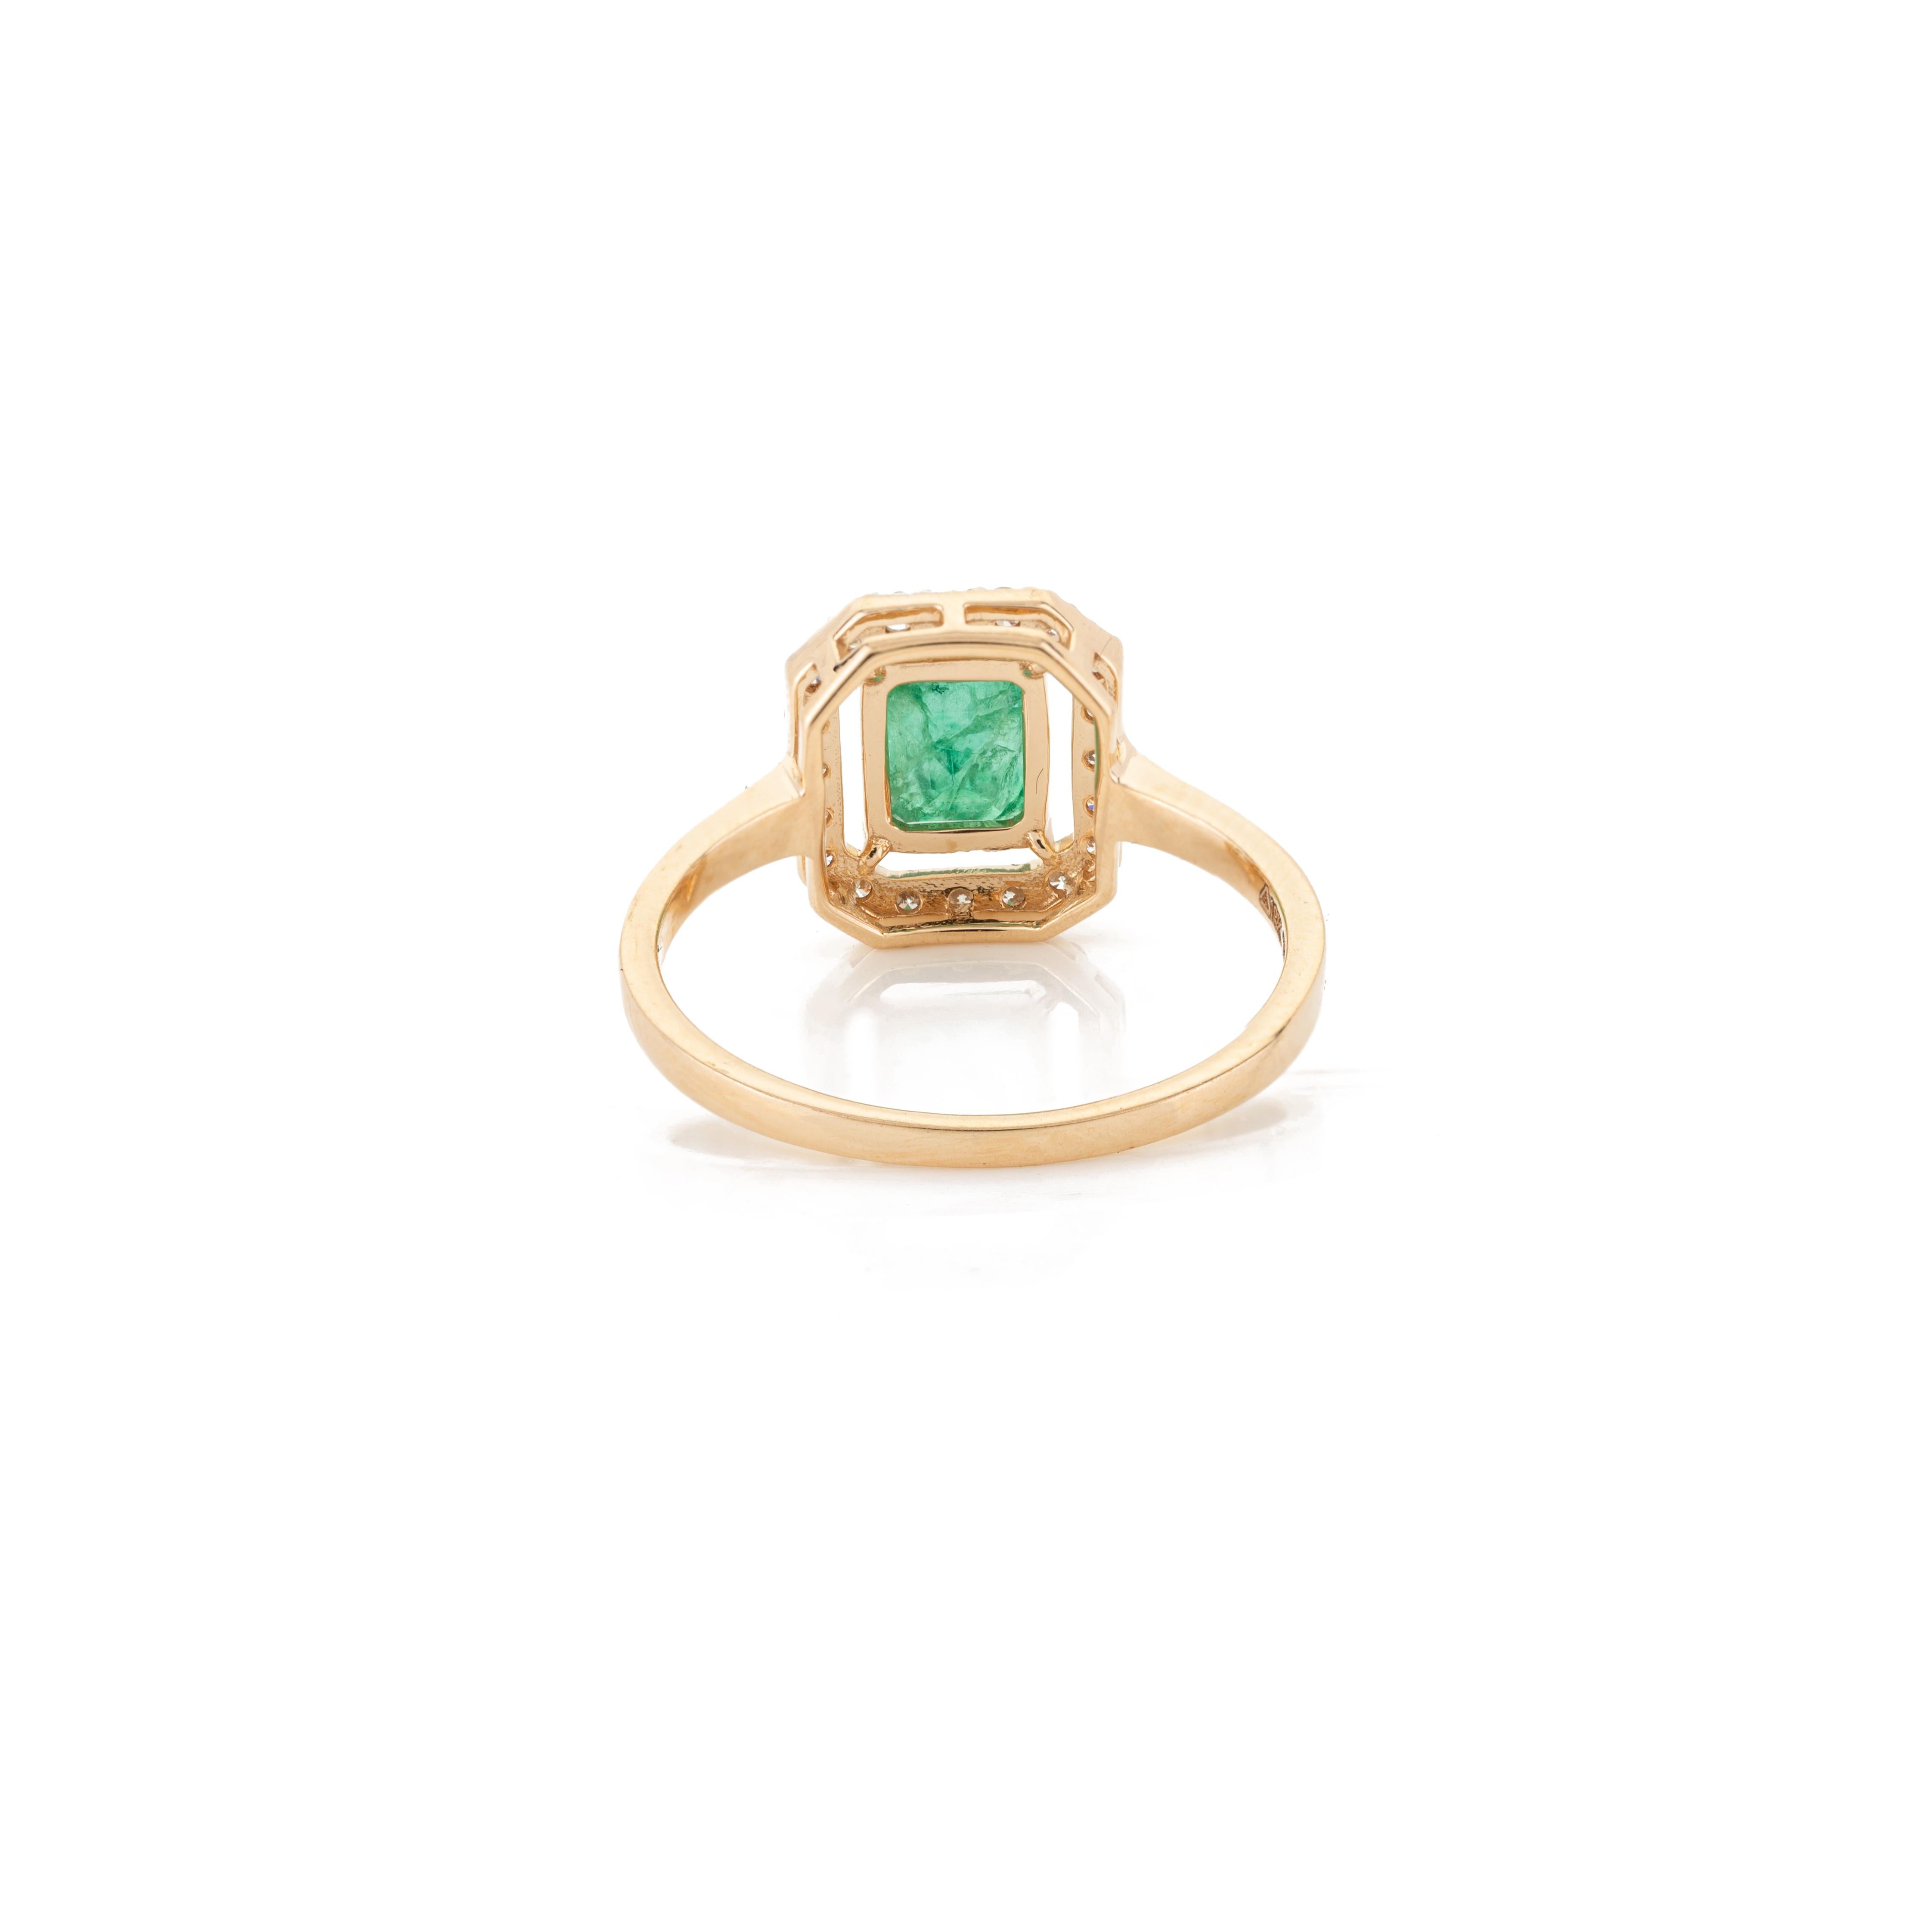 For Sale:  1.5 Carat Octagon Emerald Halo Diamond Wedding Ring in 18k Yellow Gold 6